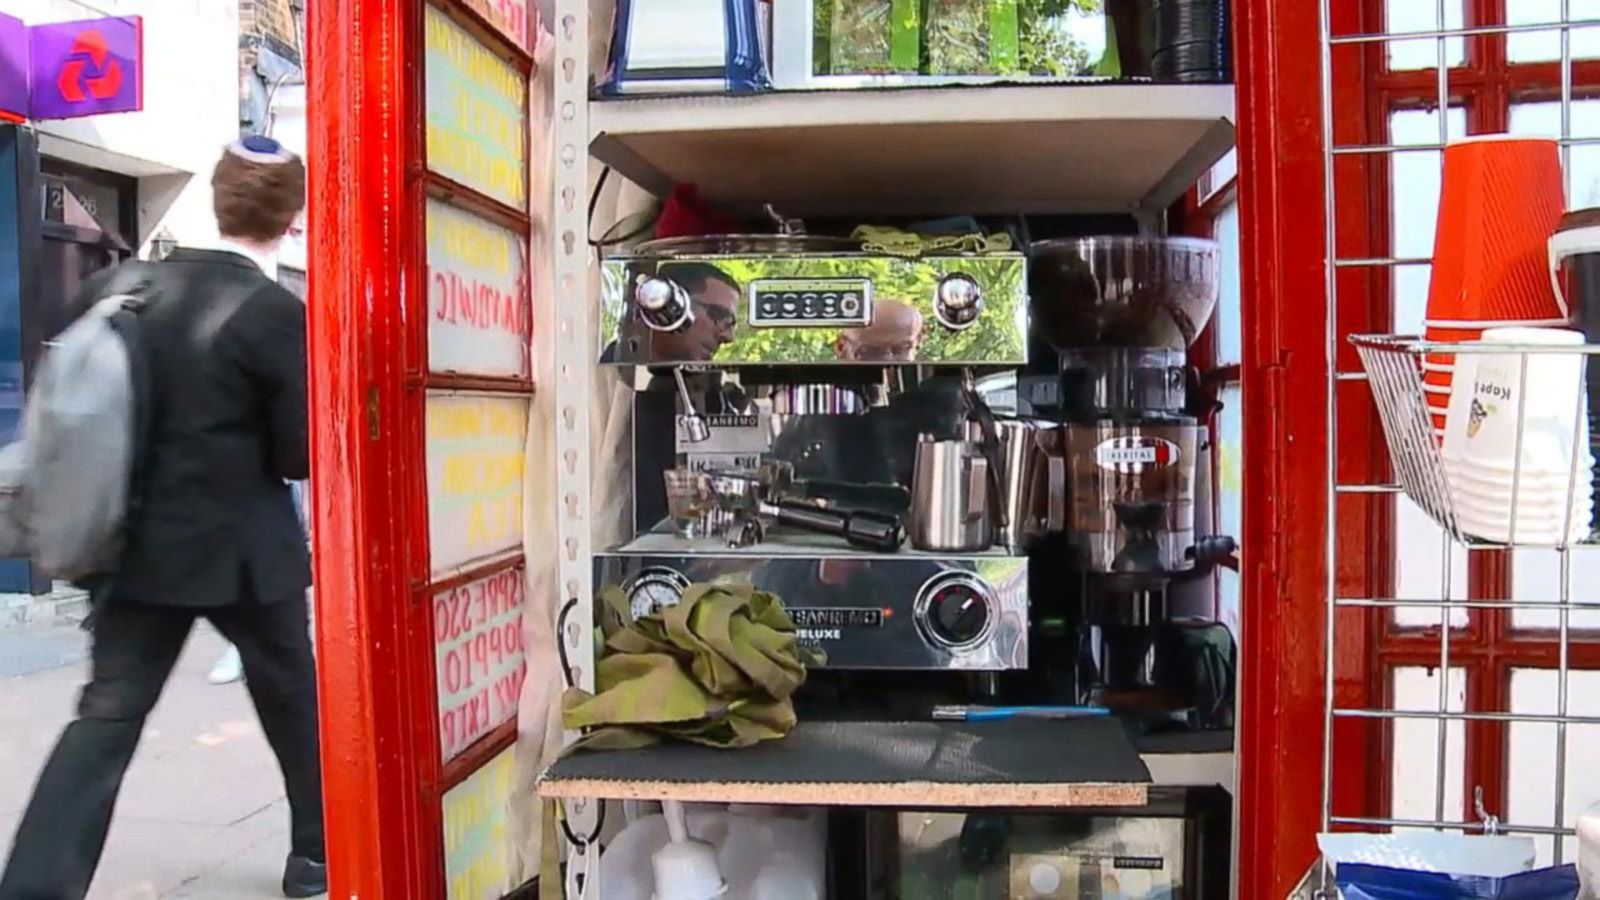 Great Britains Iconic Phone Booth Becomes Full-Service Coffee Shop